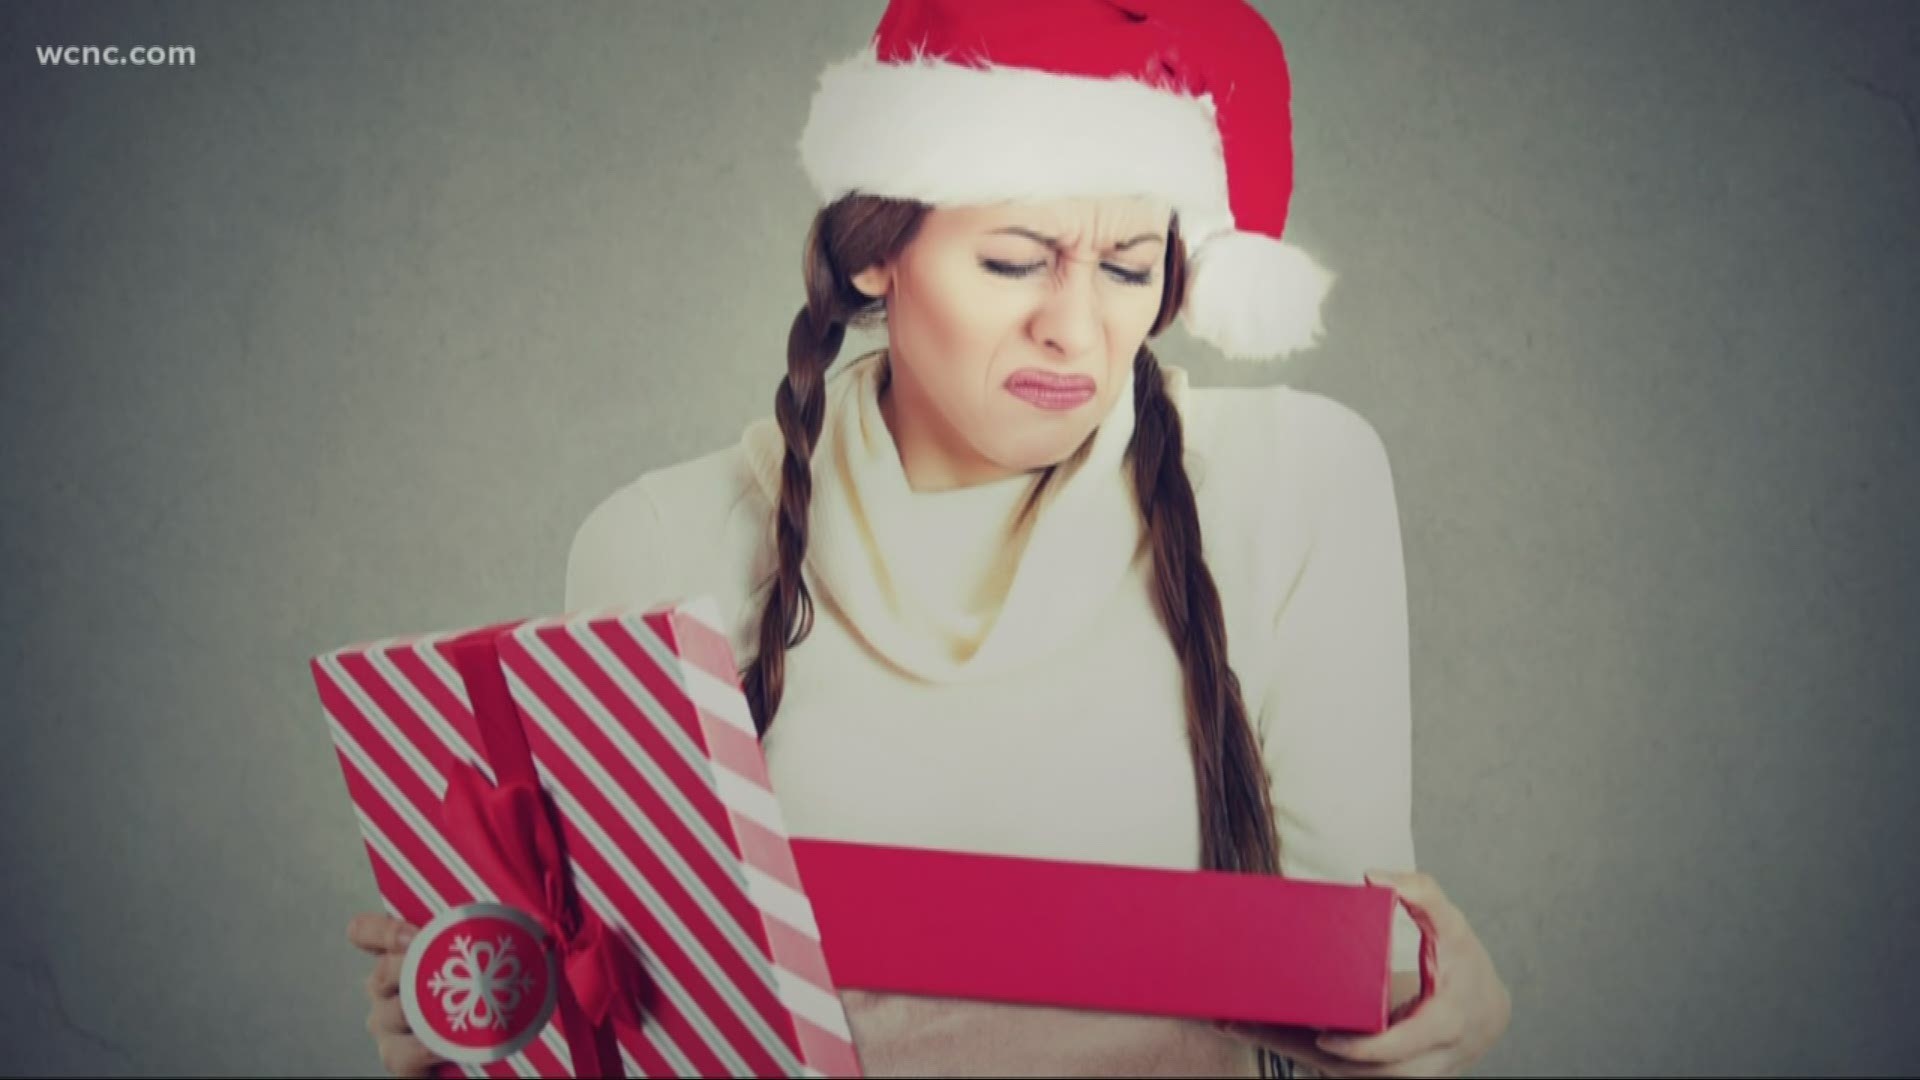 Still stewing over a bad gift you gave your in-laws? Join the club. According to a new survey, half of people feel bad about the gifts they gave this year.